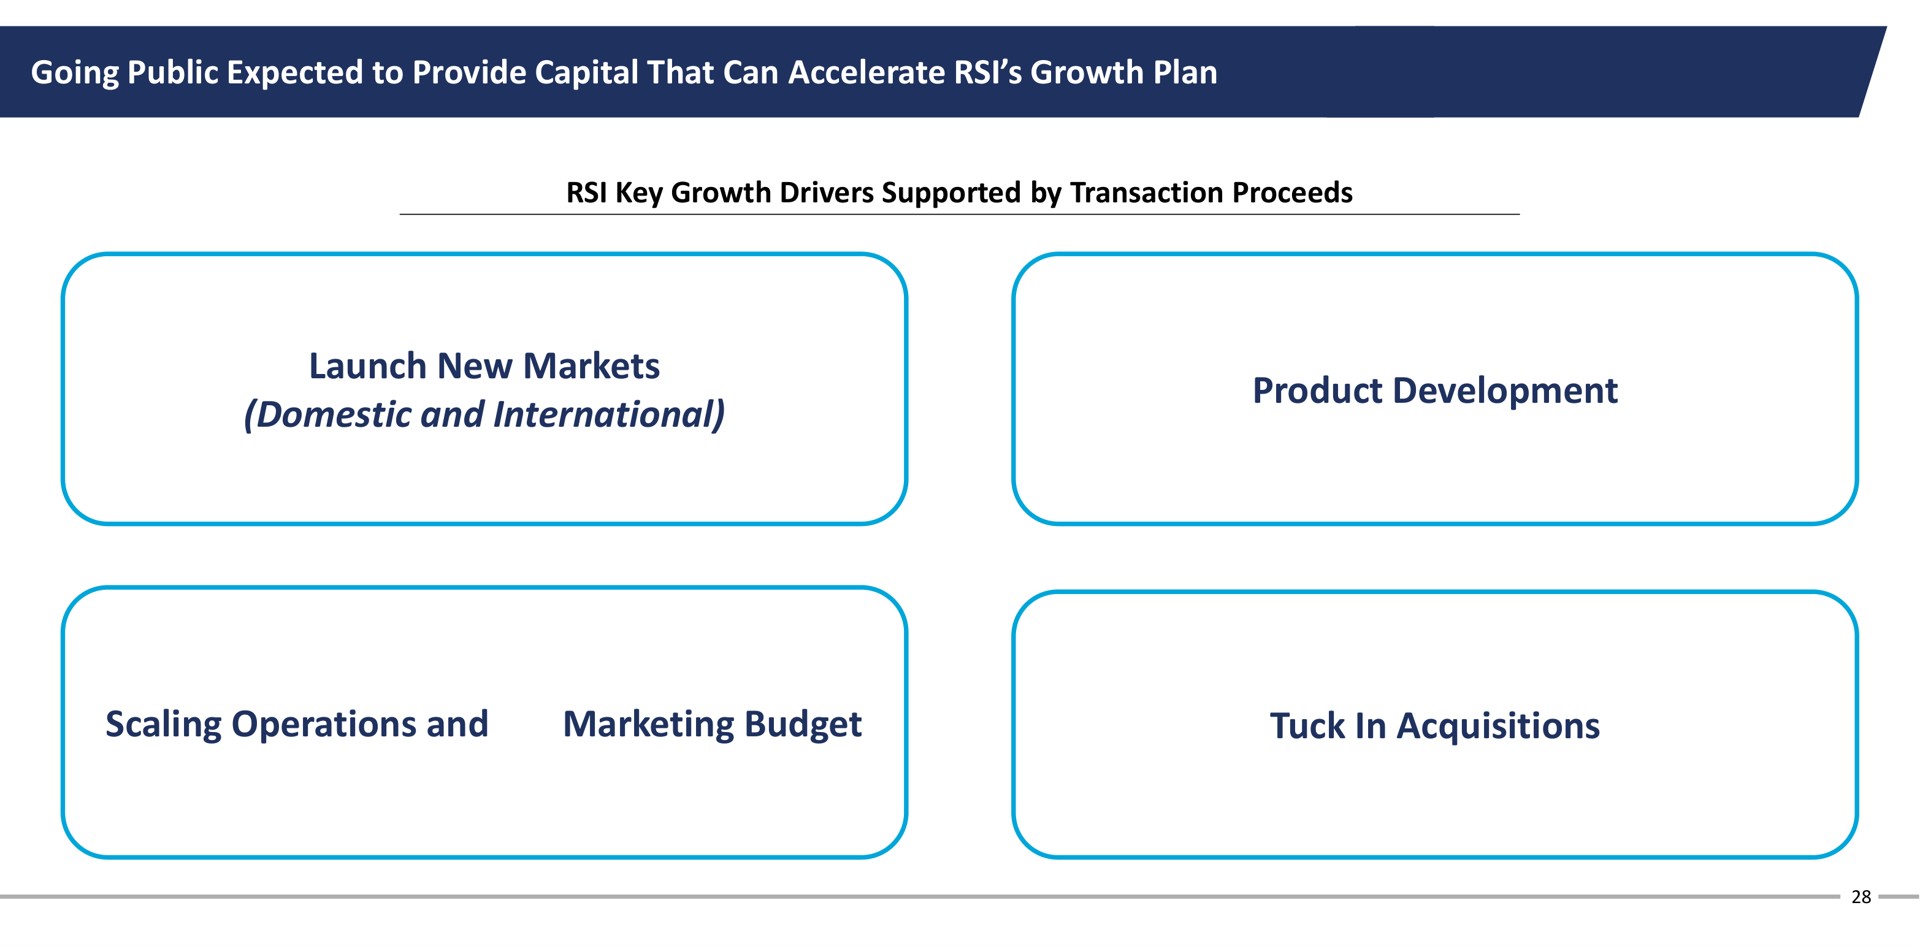 going public expected to provide capital that can accelerate growth plan key growth drivers supported by transaction proceeds launch new markets domestic and international product development scaling operations and marketing budget tuck in acquisitions | Rush Street